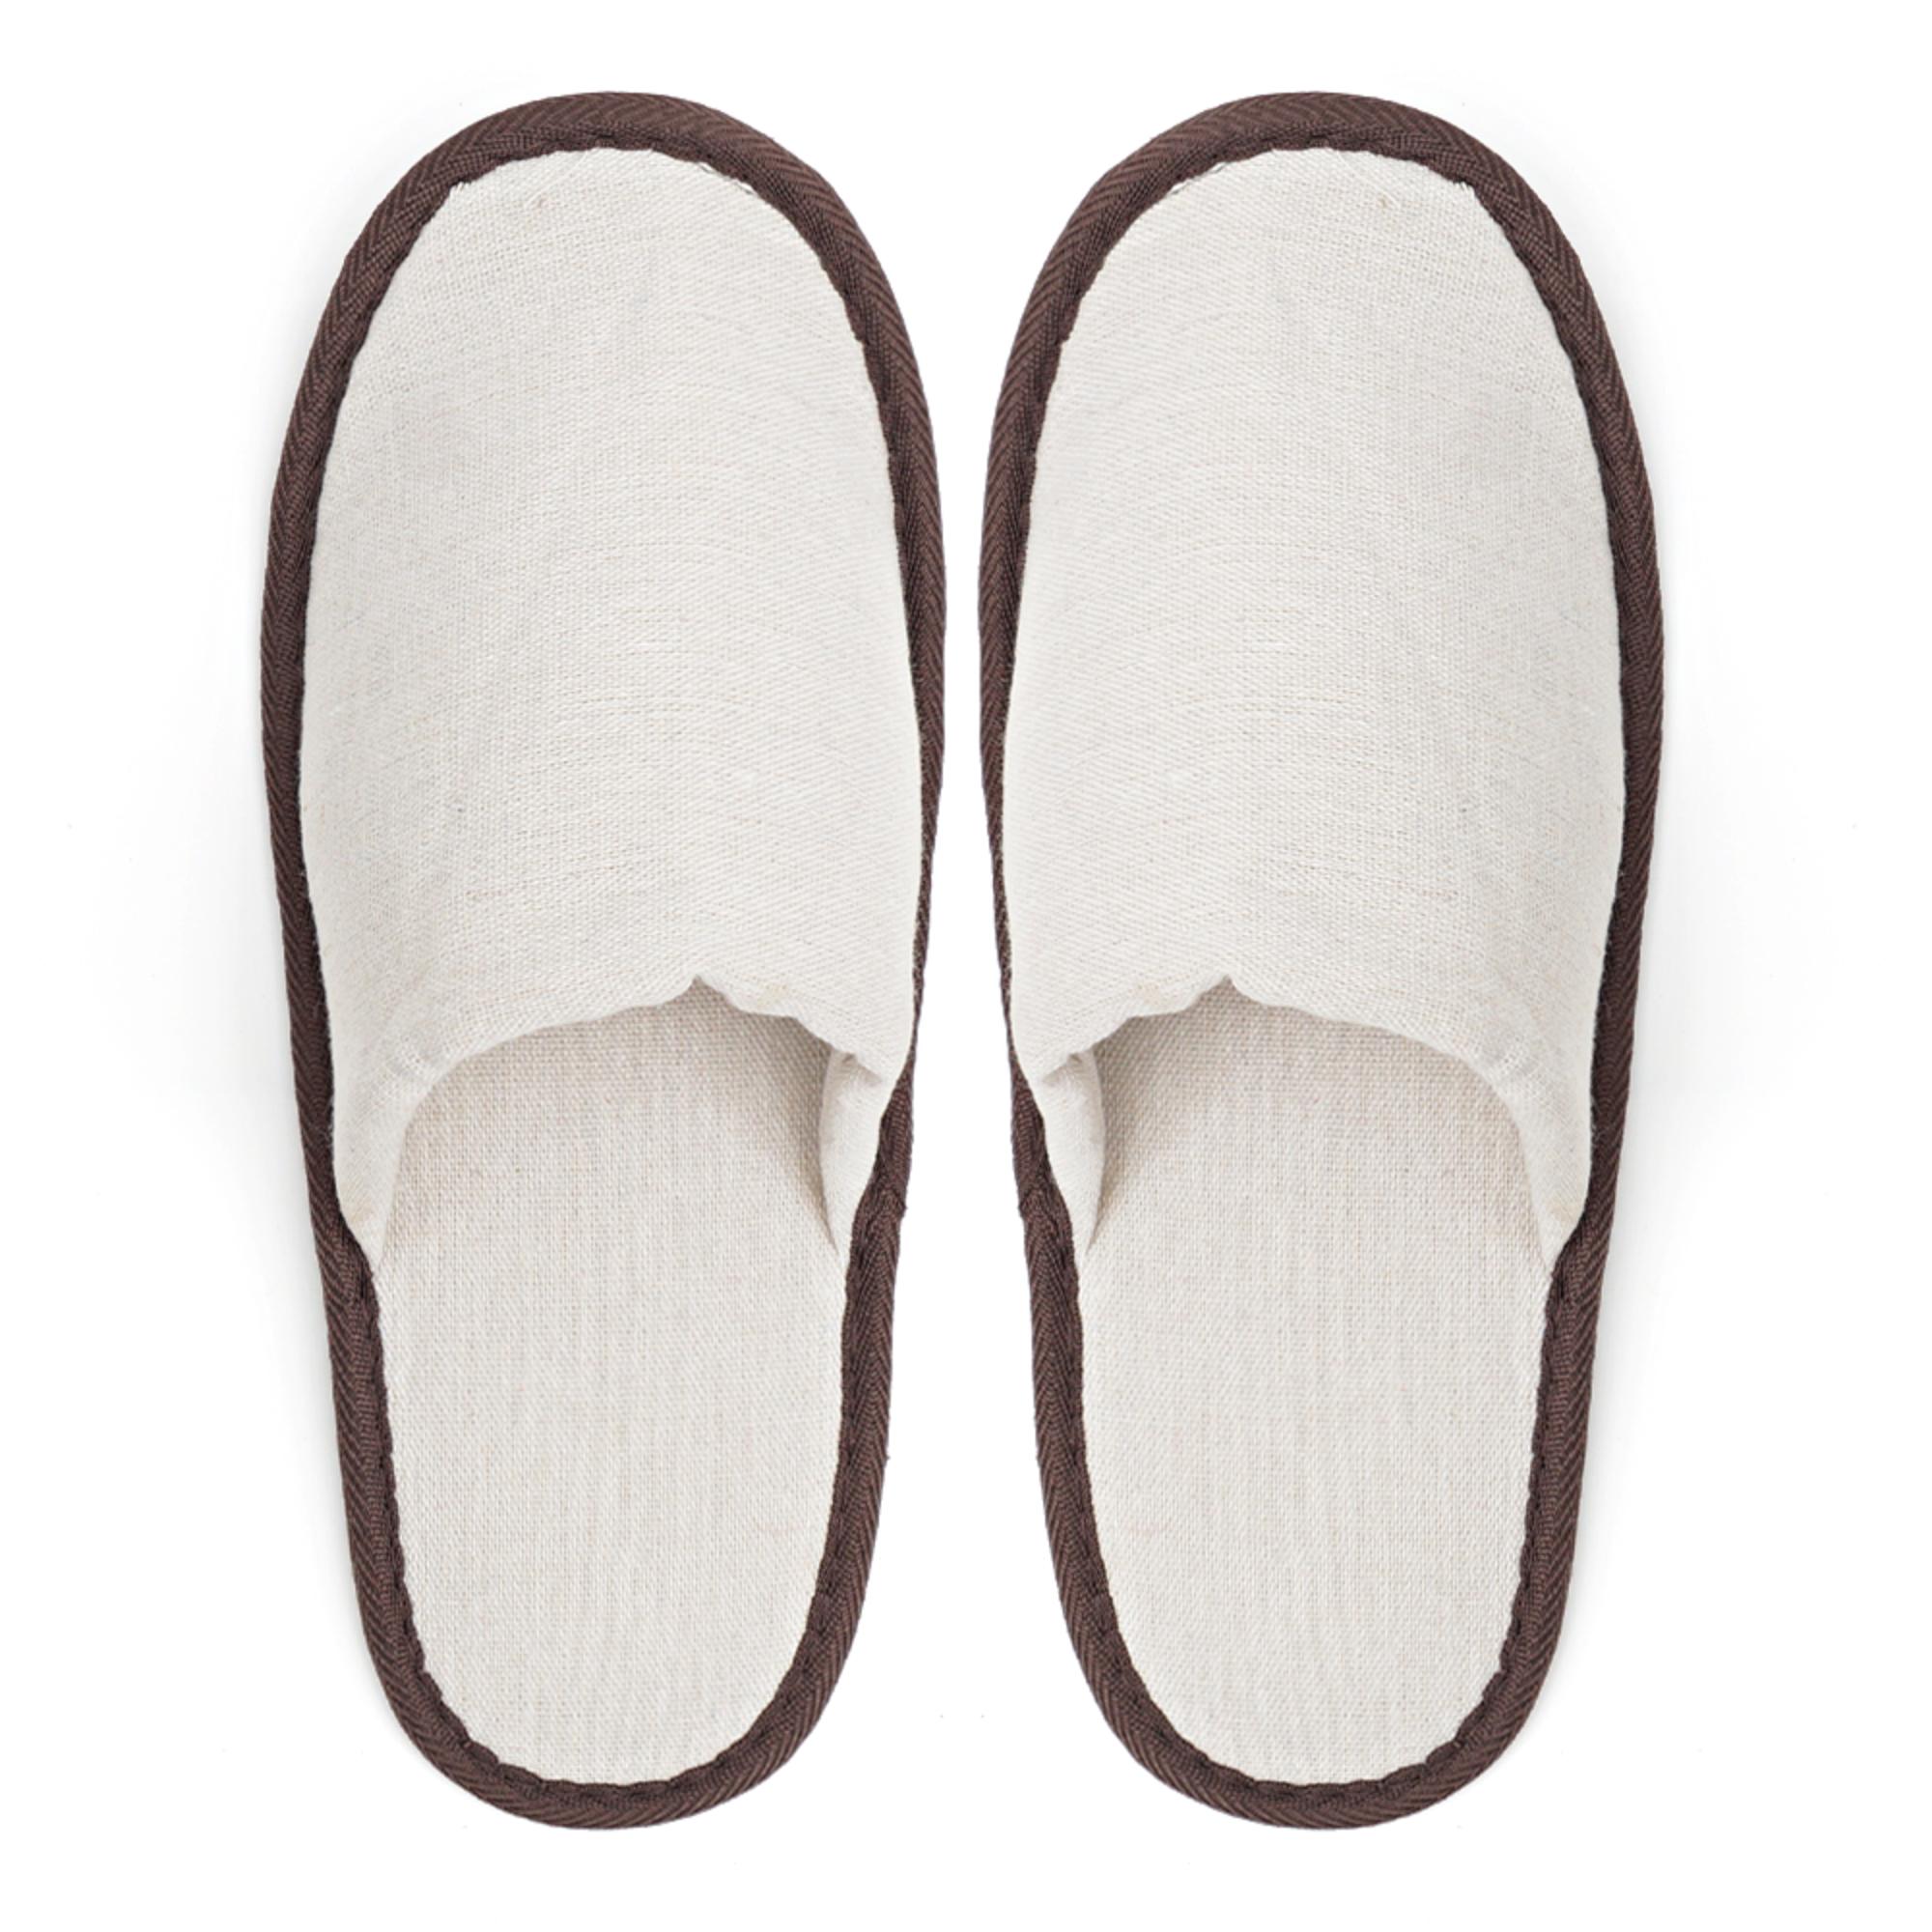 Coconut Palm Sole Biodegradable Eco Disposable Hotel Slippers